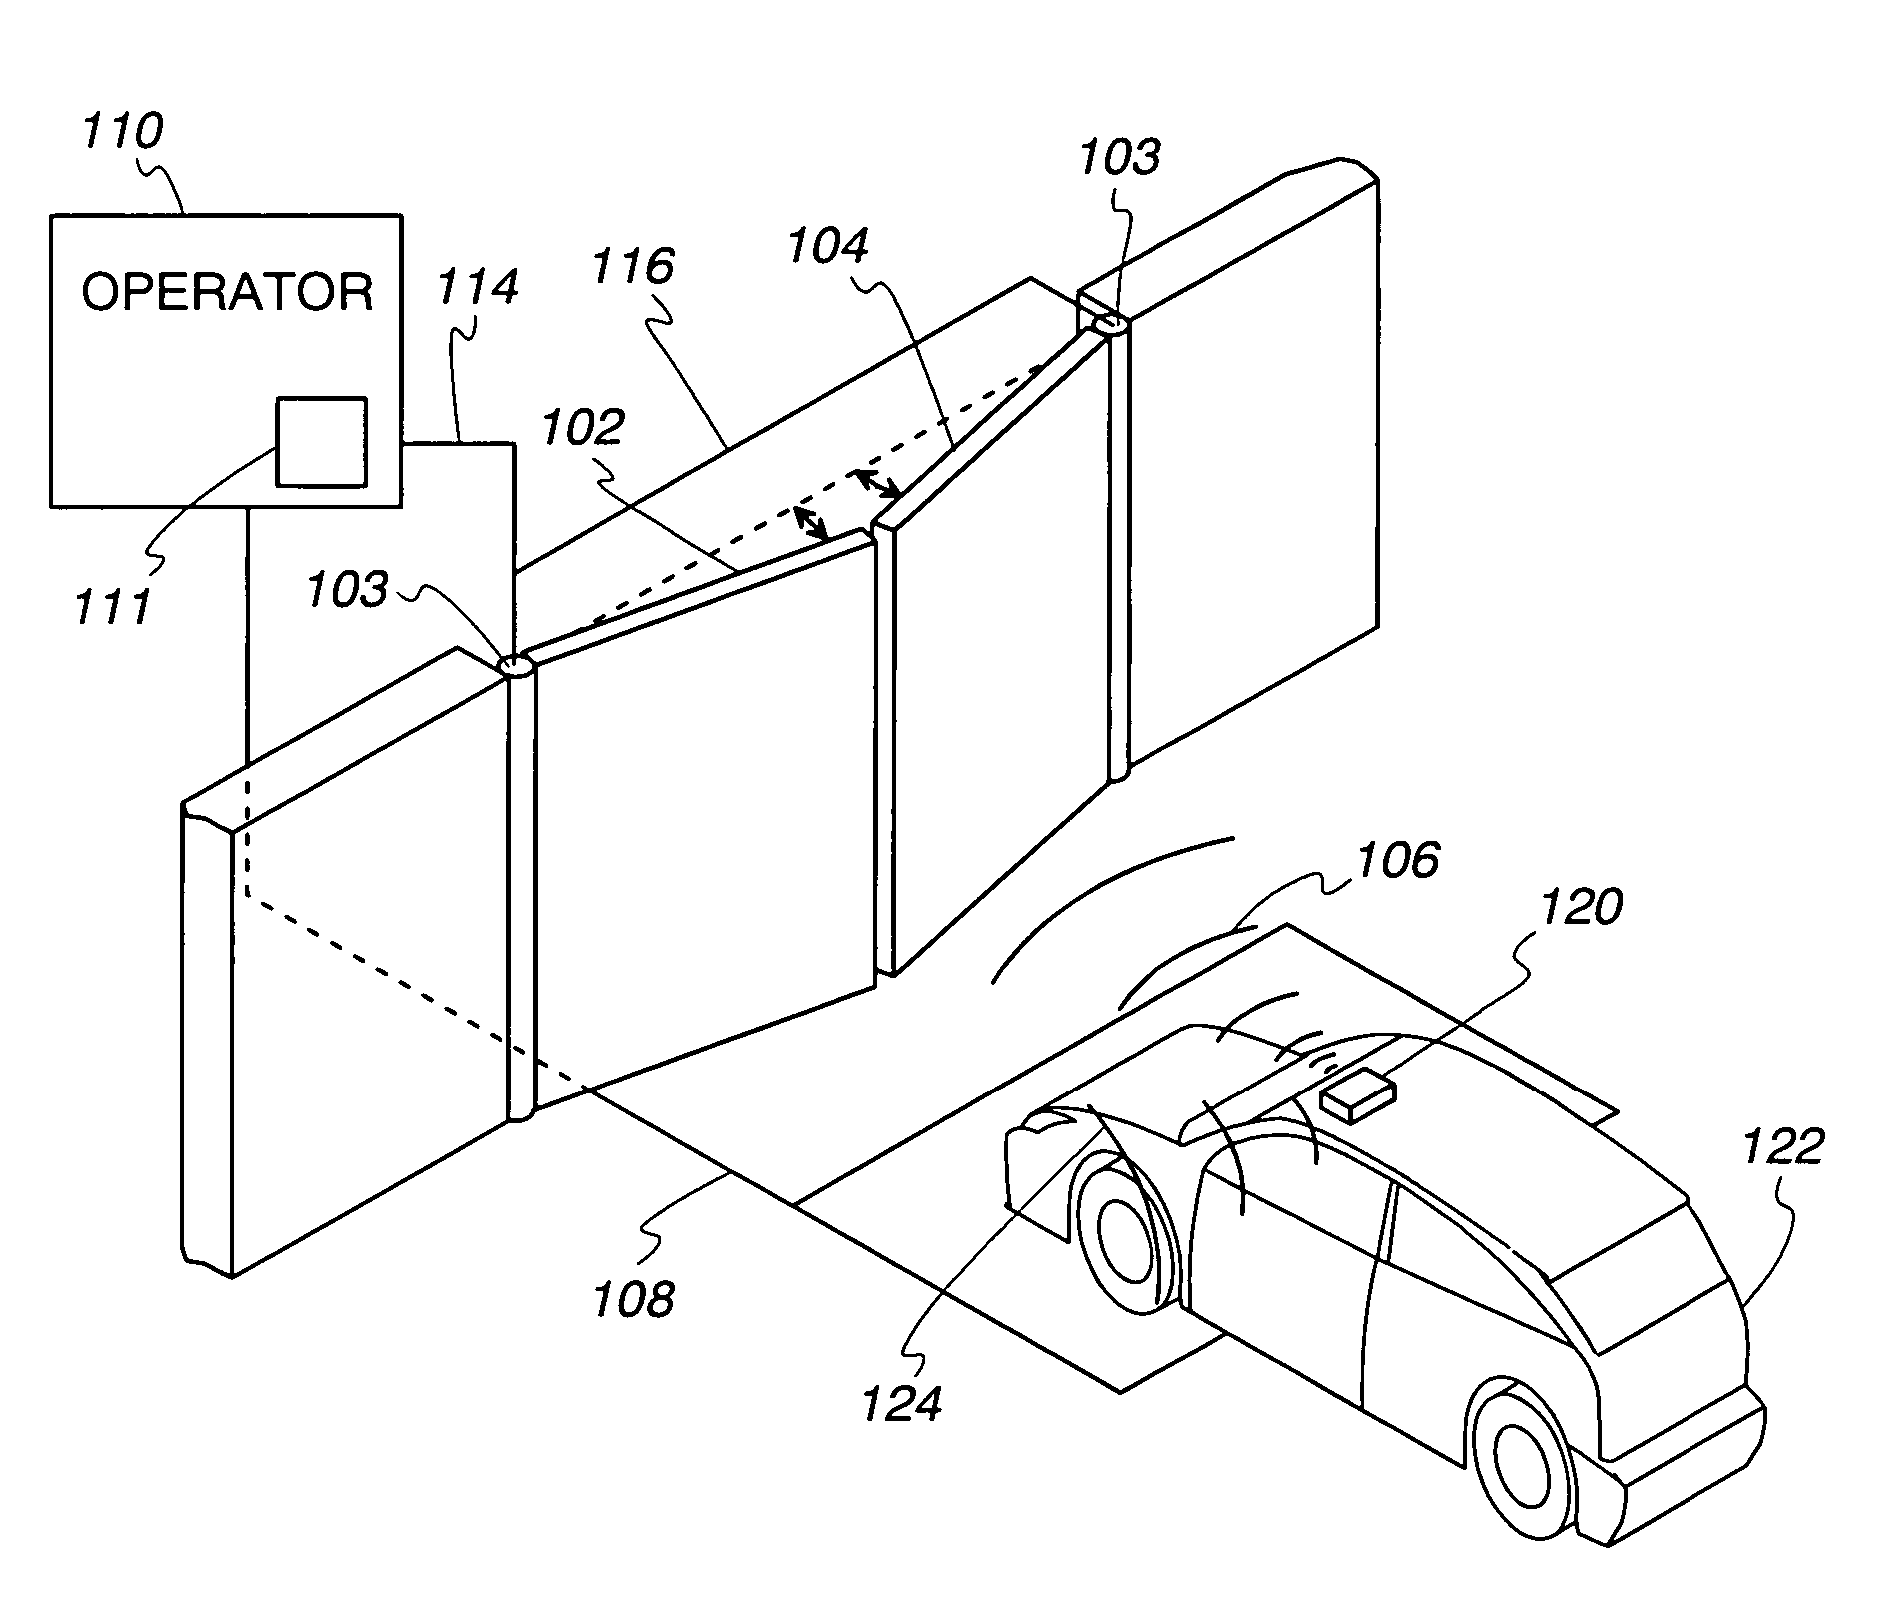 System and method for operating a moveable barrier using a loop detector